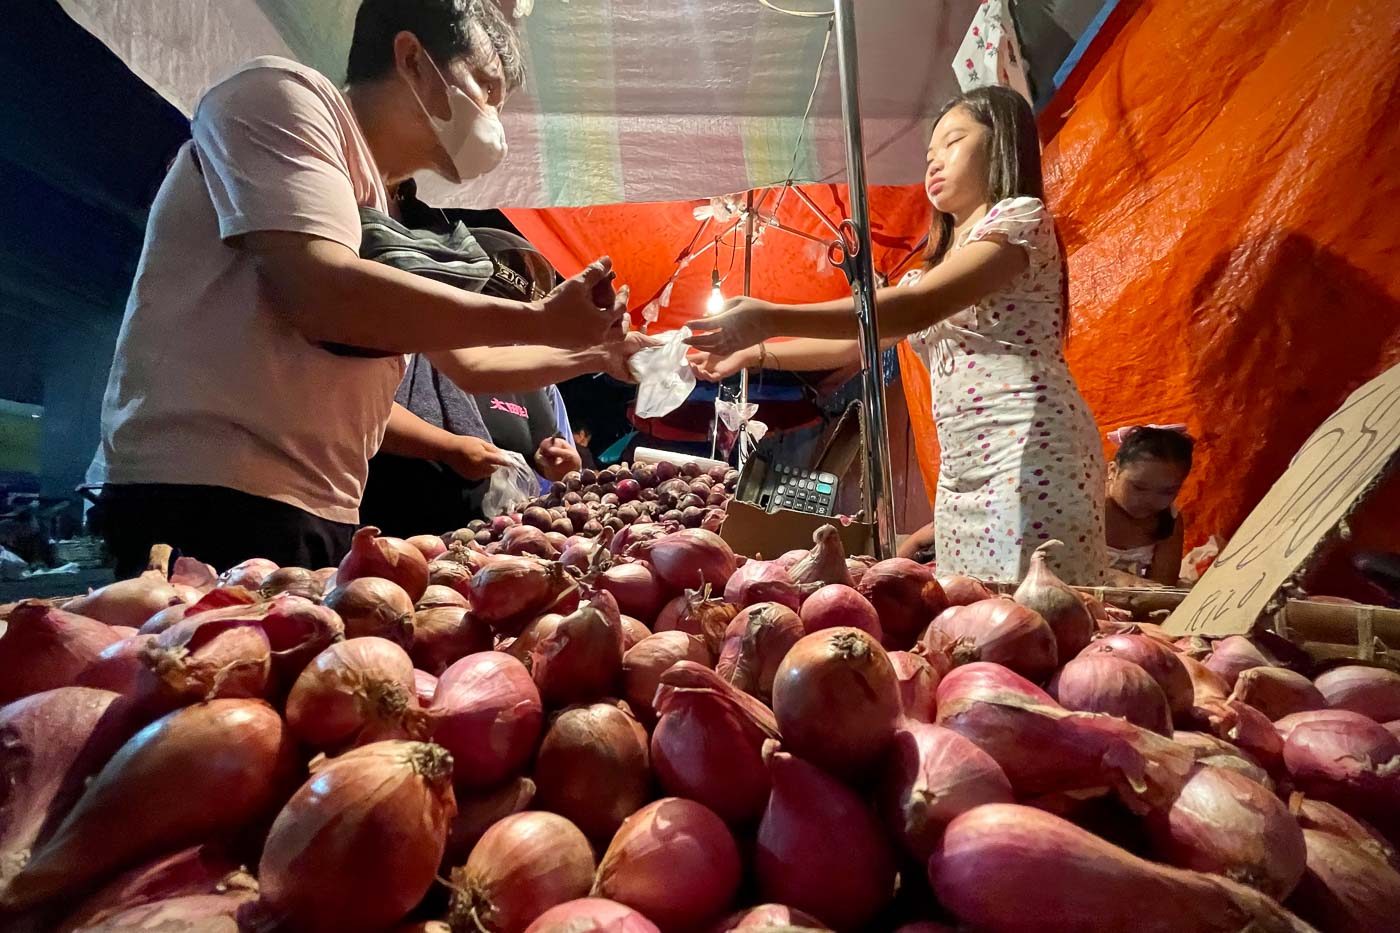 EXPLAINER: The rise in onion prices – and why late imports don’t help